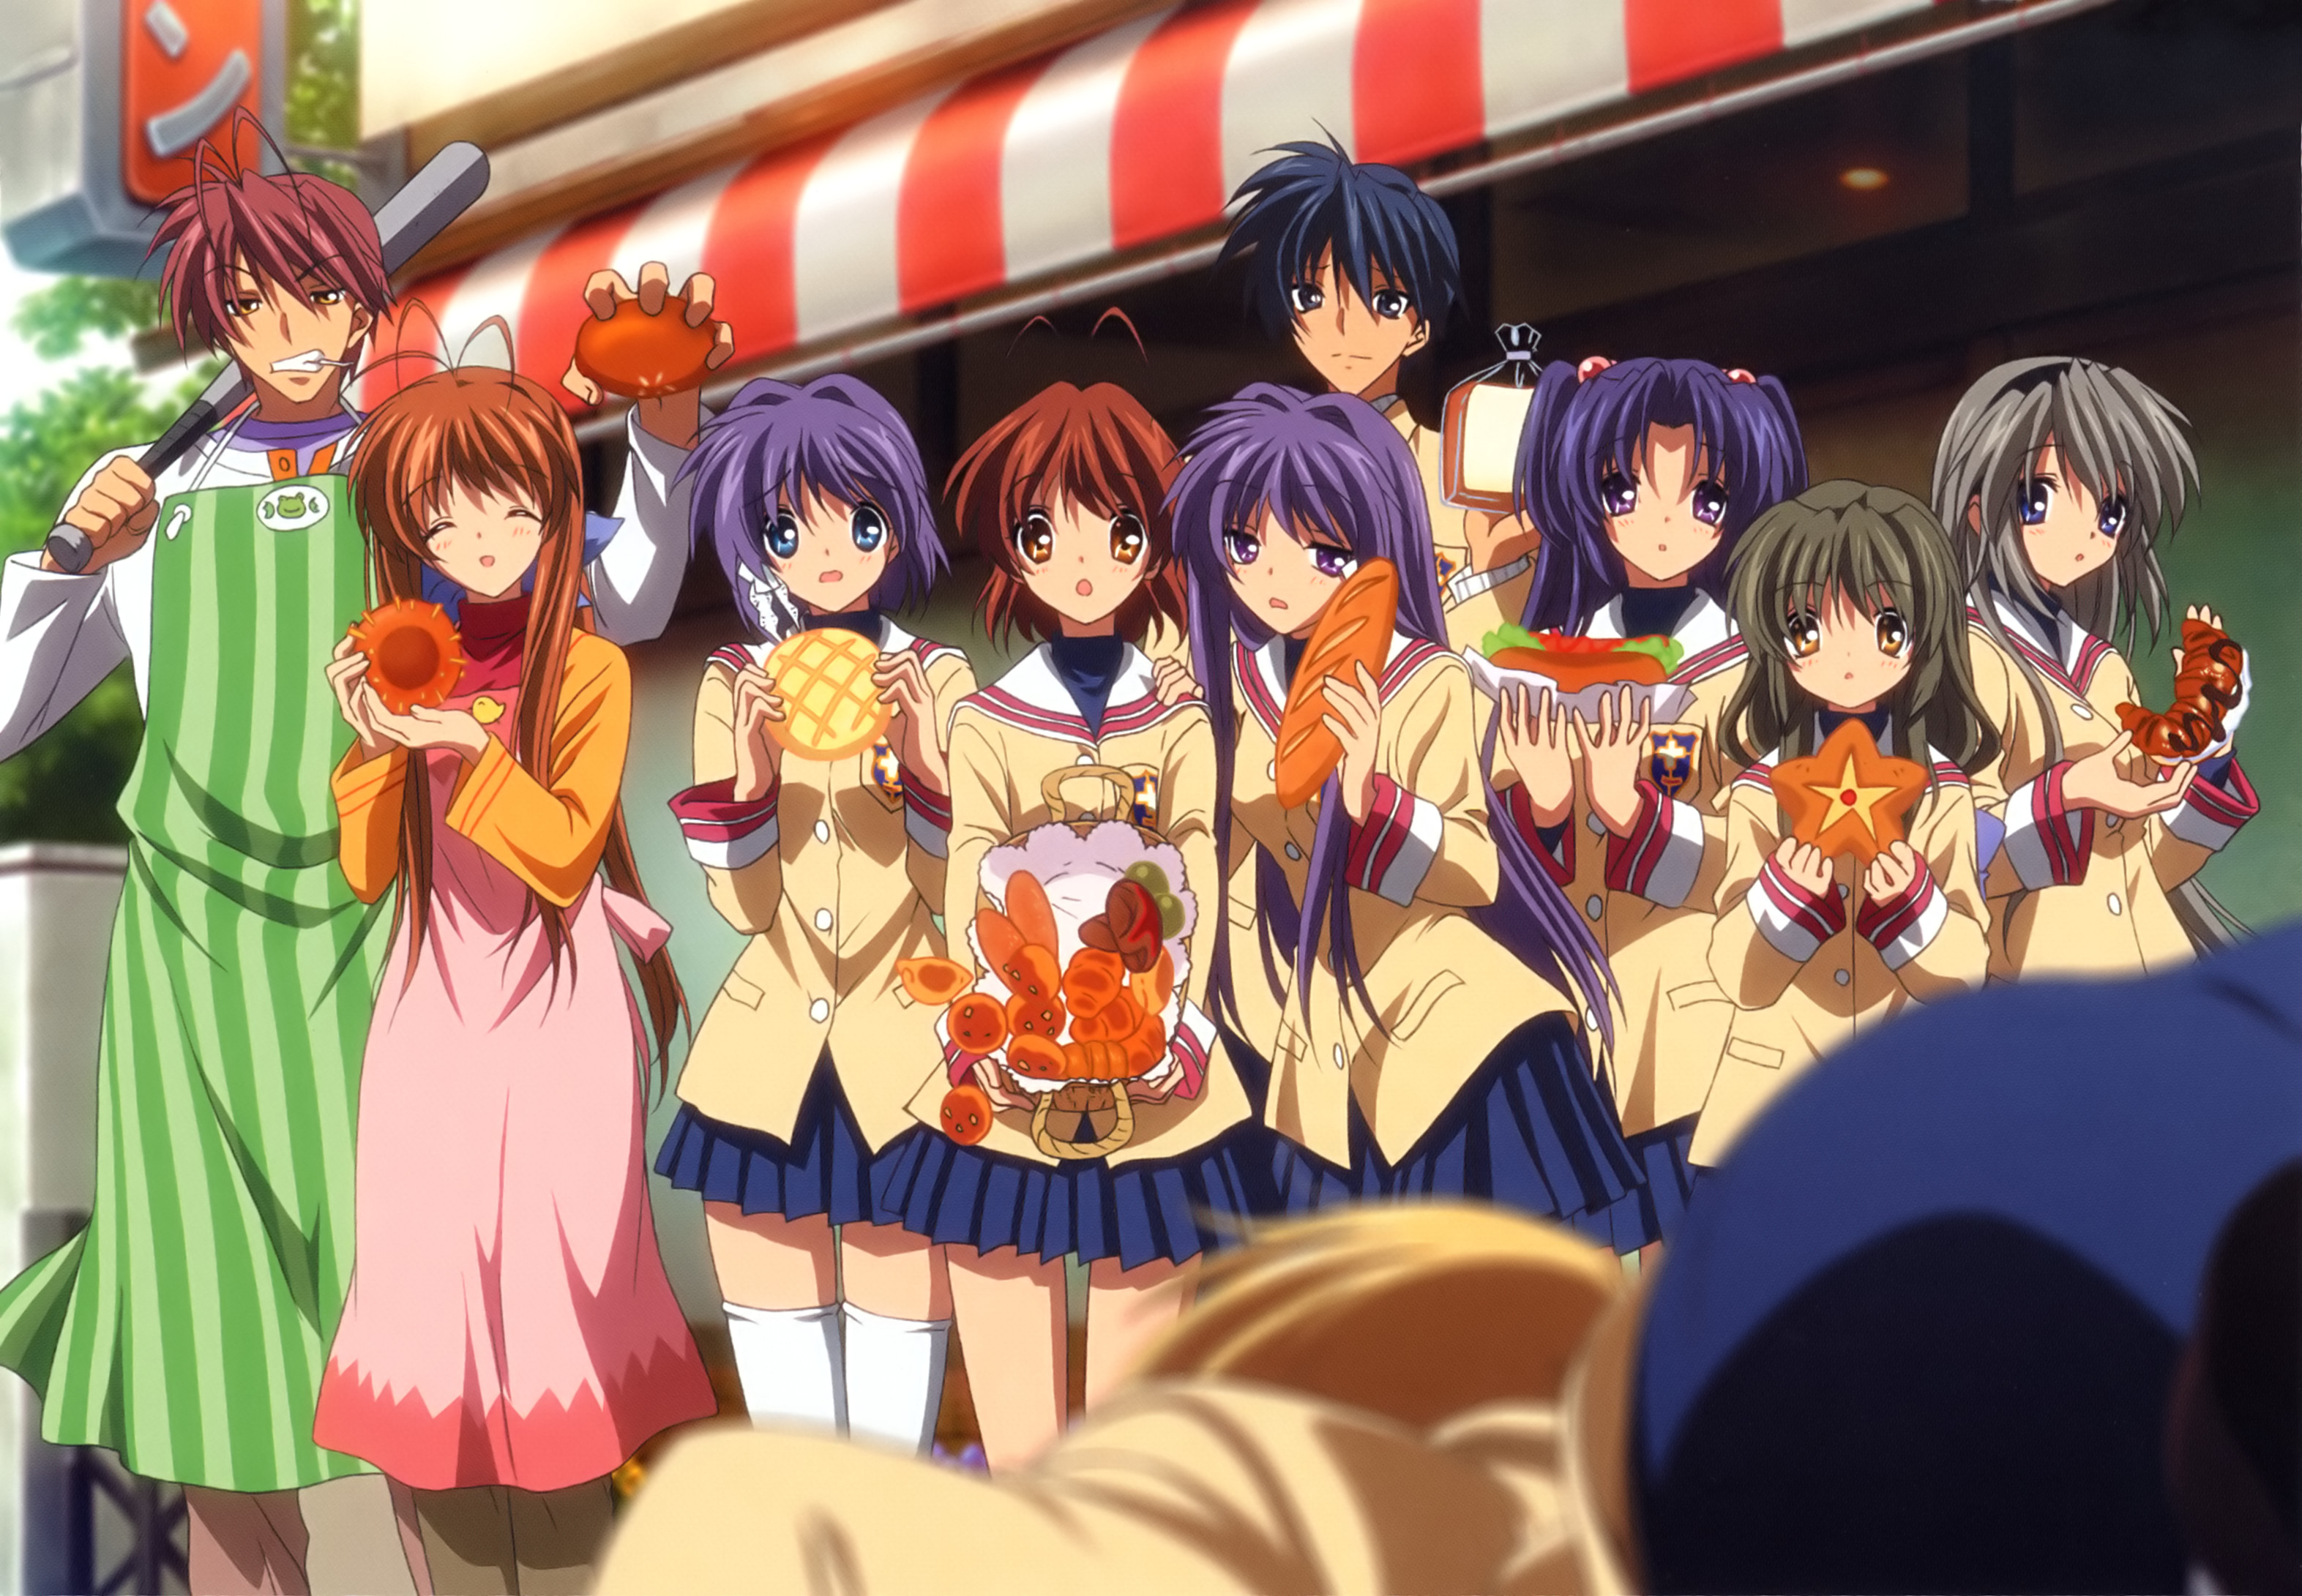 Clannad -After Story- Thus Far [Episodes 1-3]